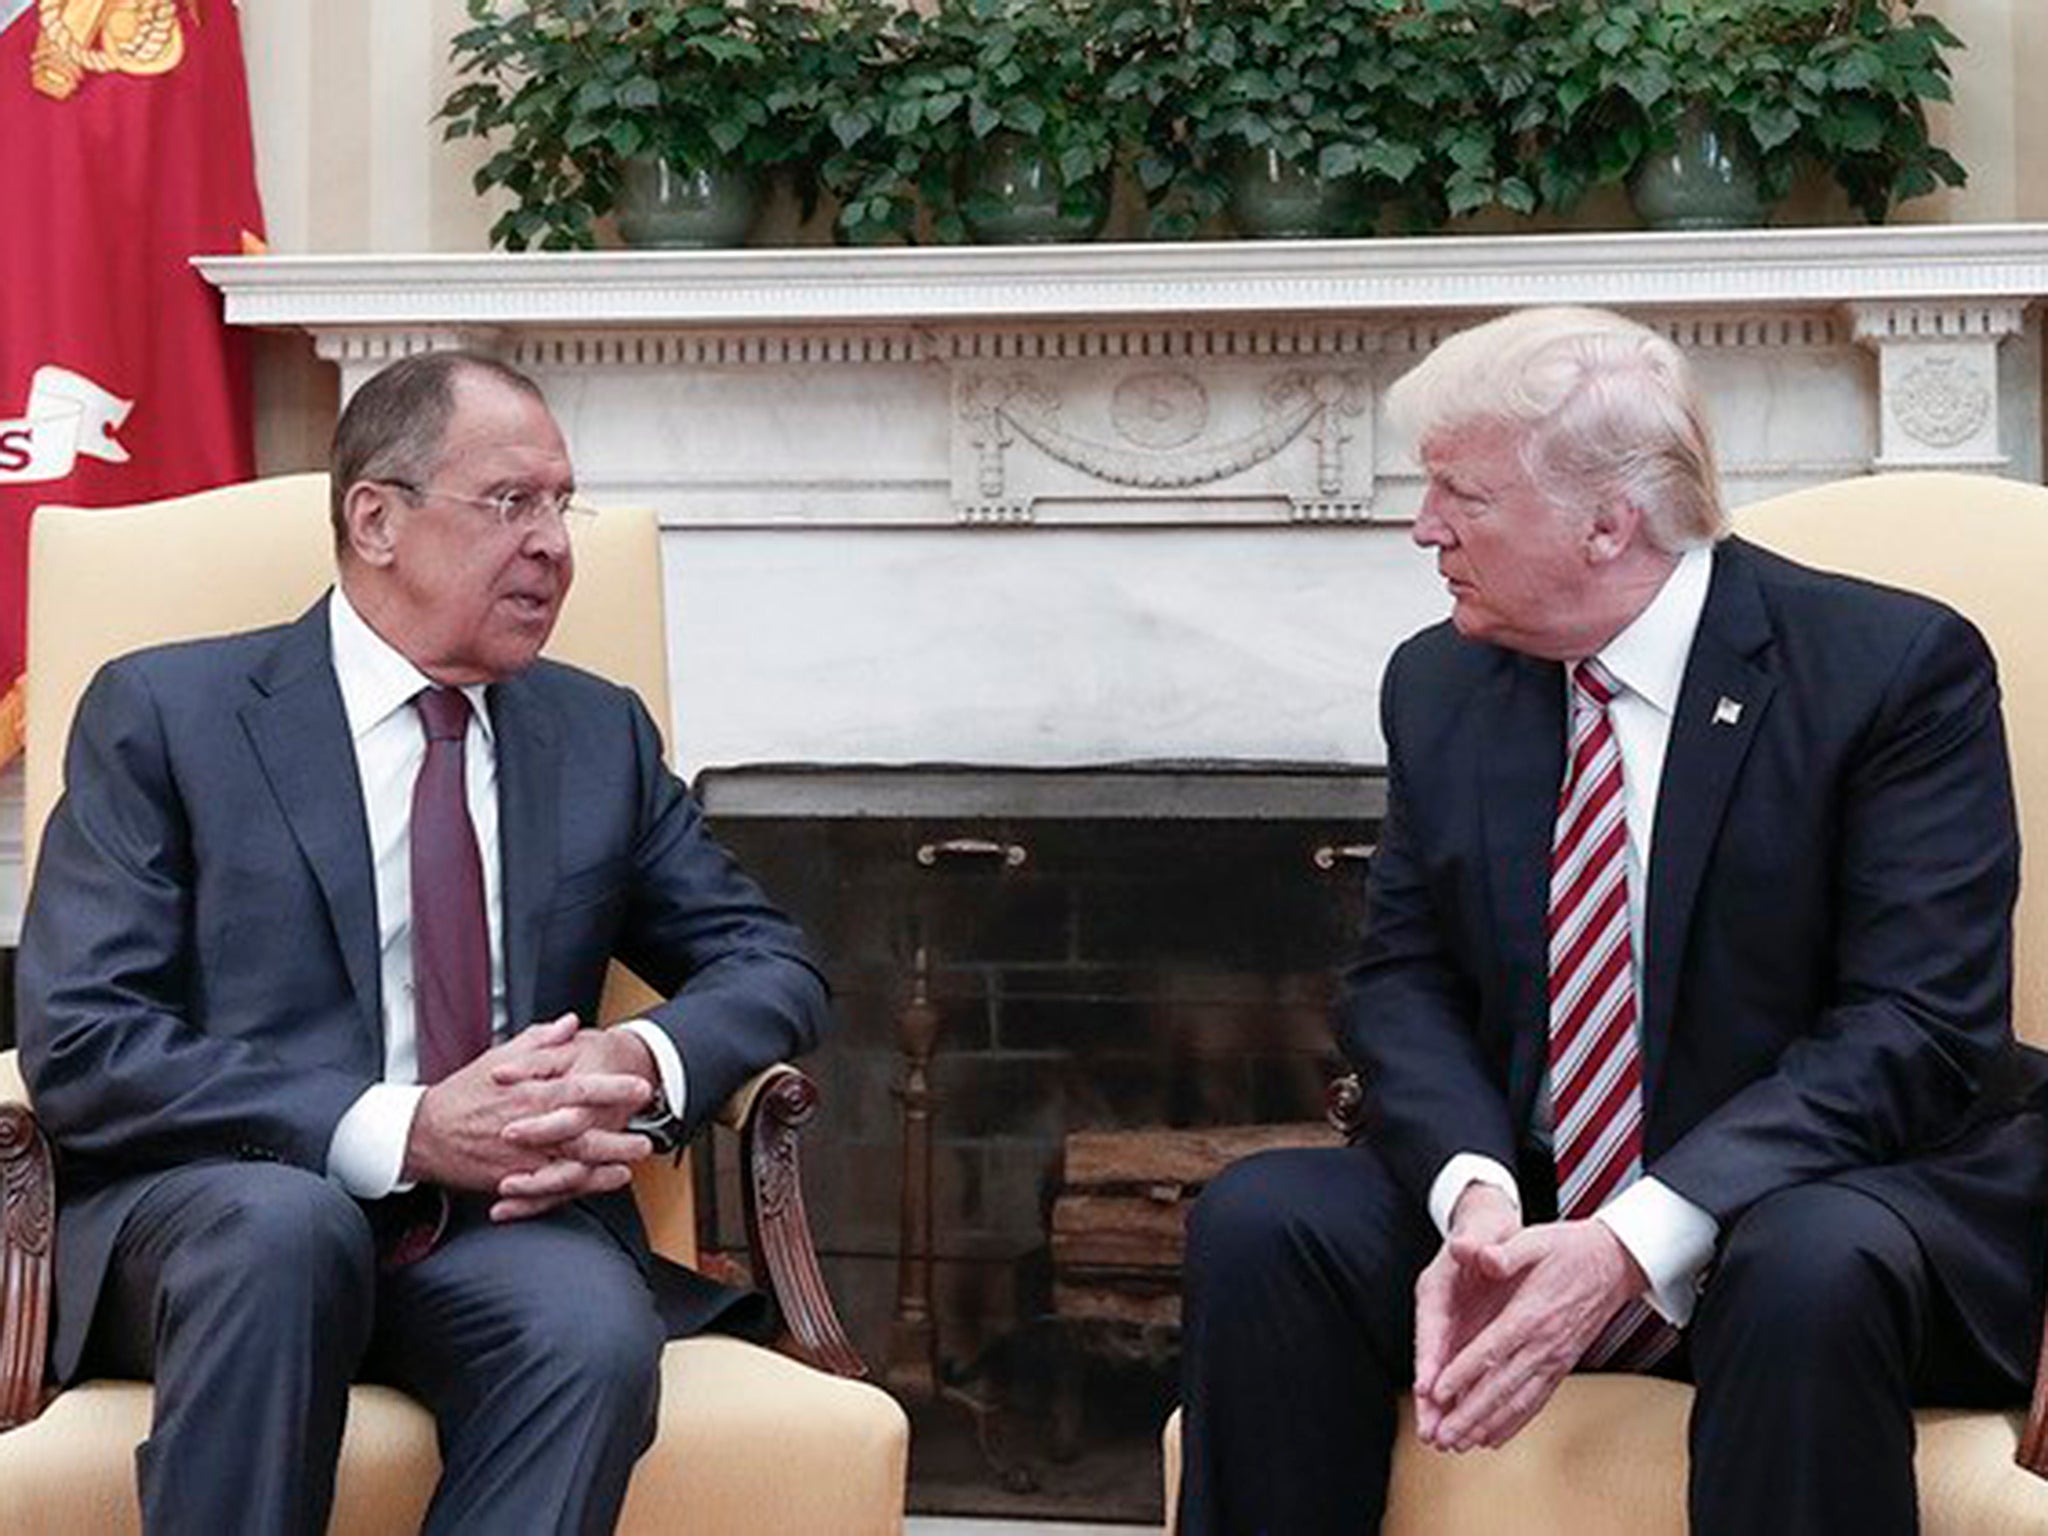 Donald Trump met with Russia’s foreign minister Sergei Lavrov the day after firing FBI director James Comey